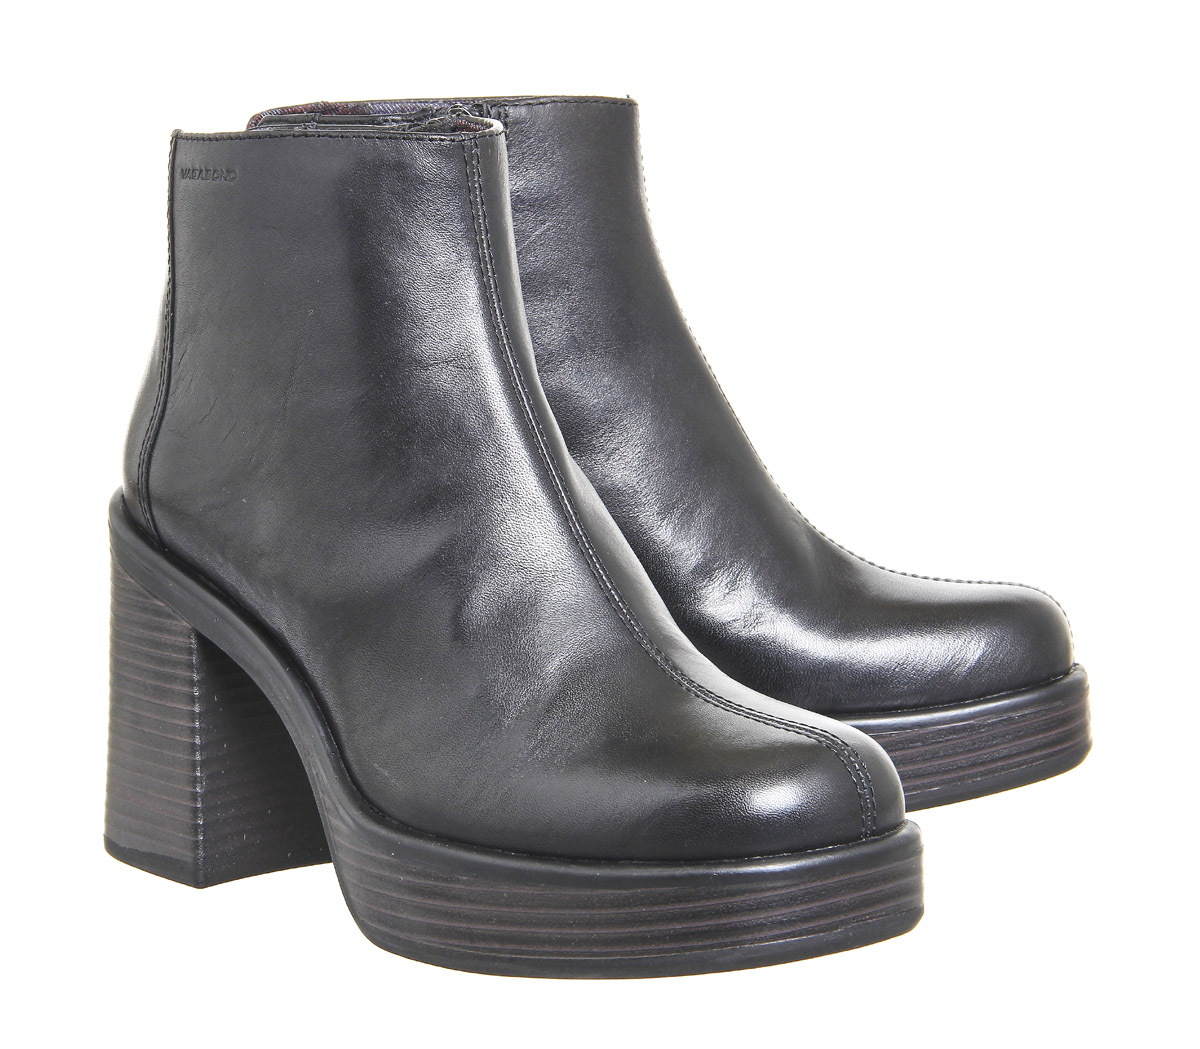 Vagabond Shoemakers Tyra Ankle Boots Black Leather - Women's Ankle Boots